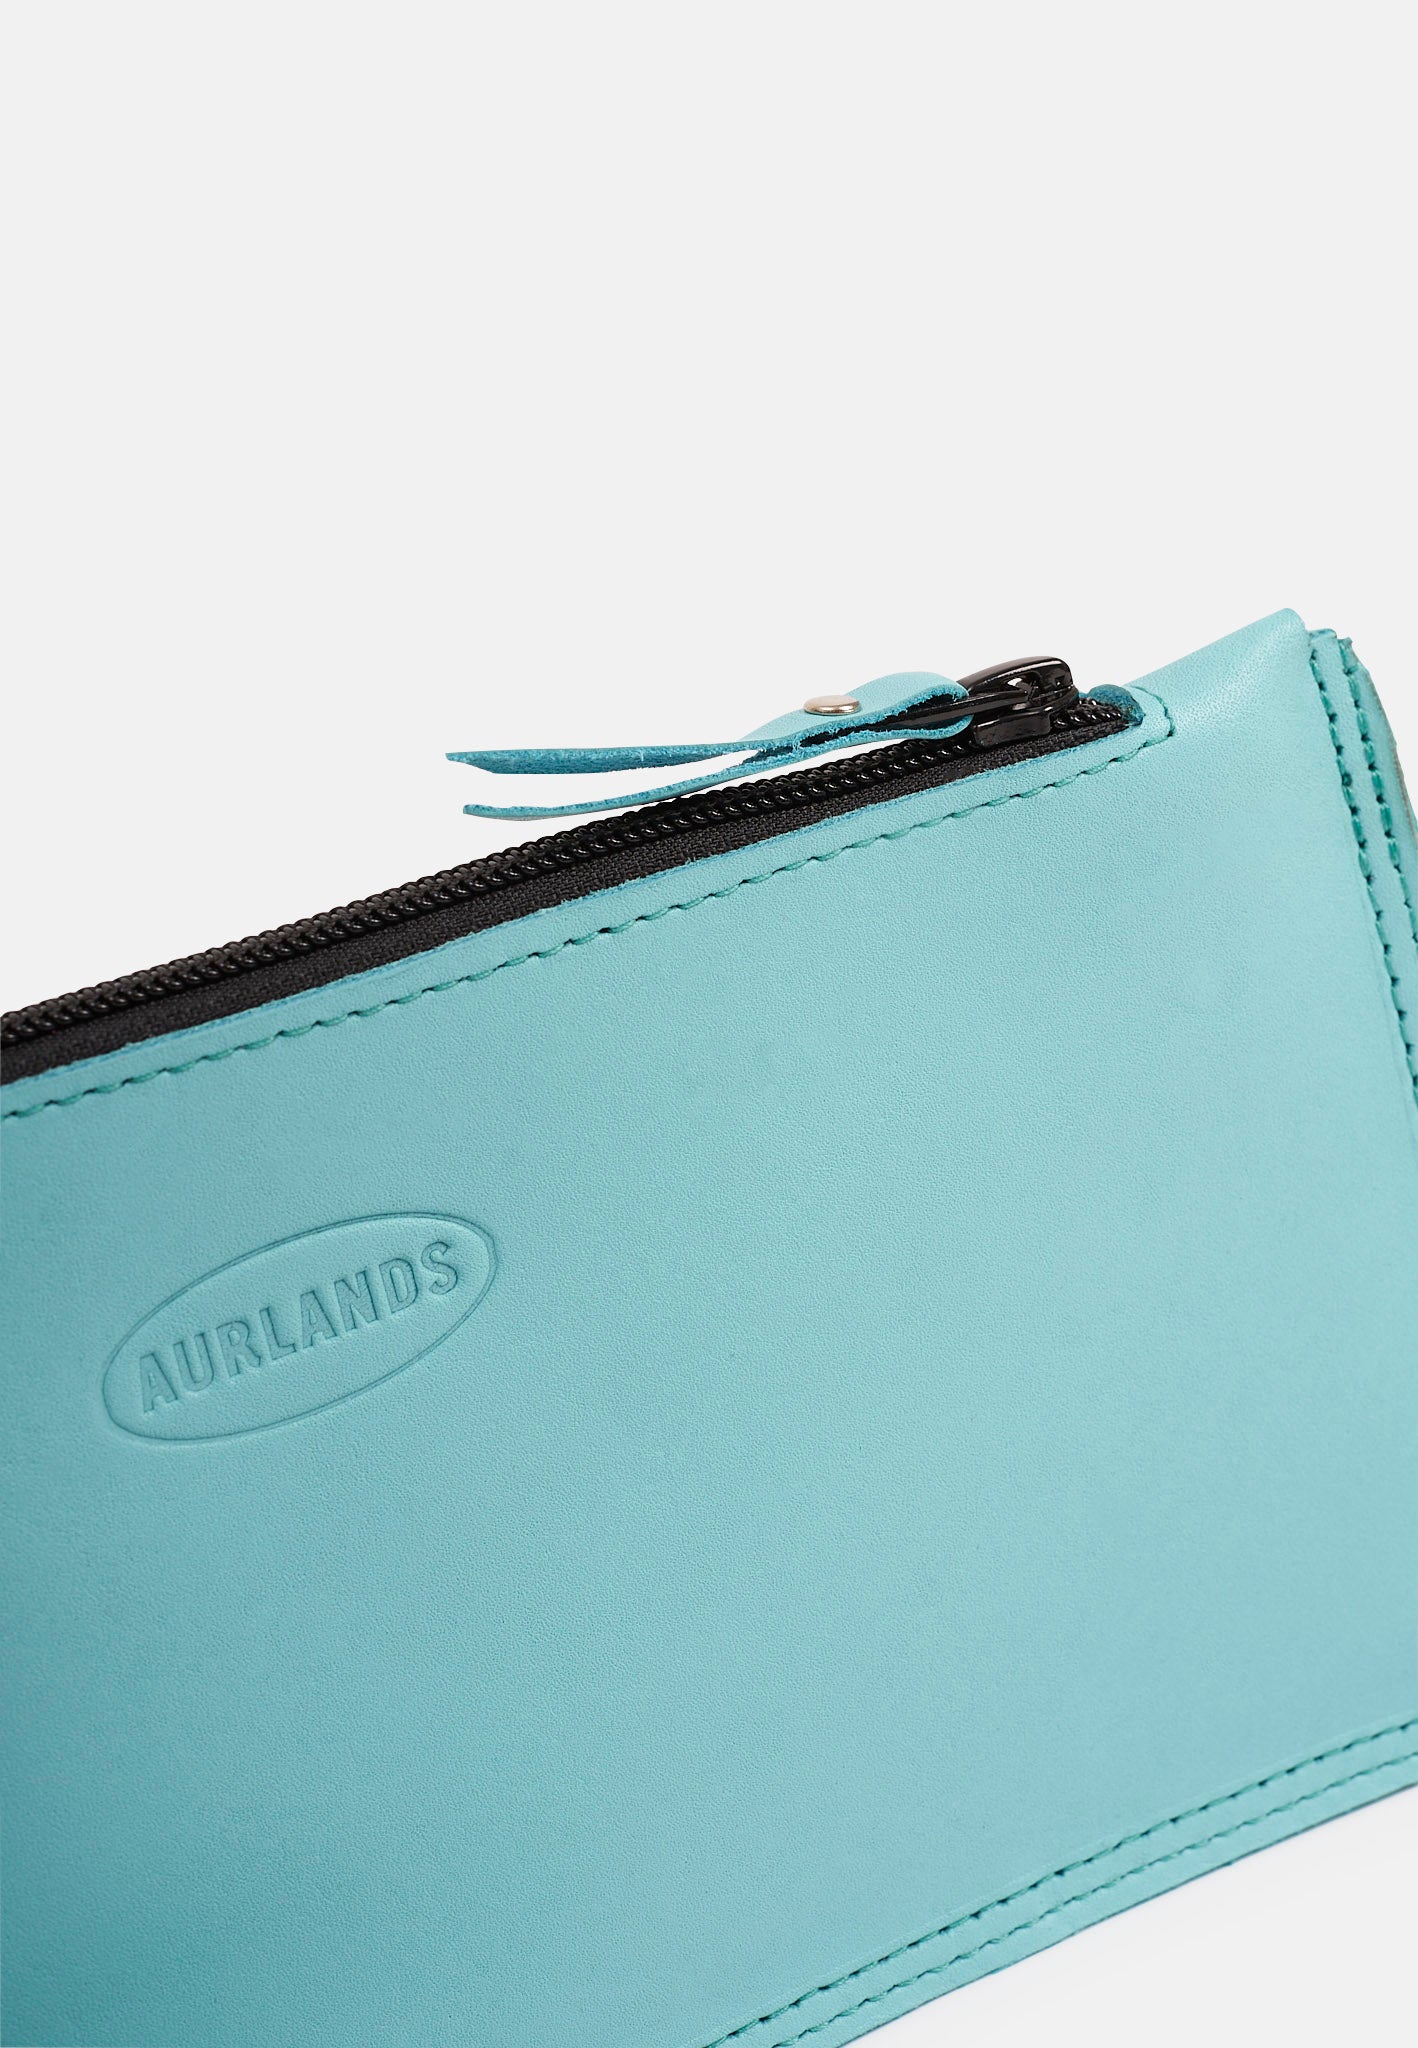 Wallet Turquoise